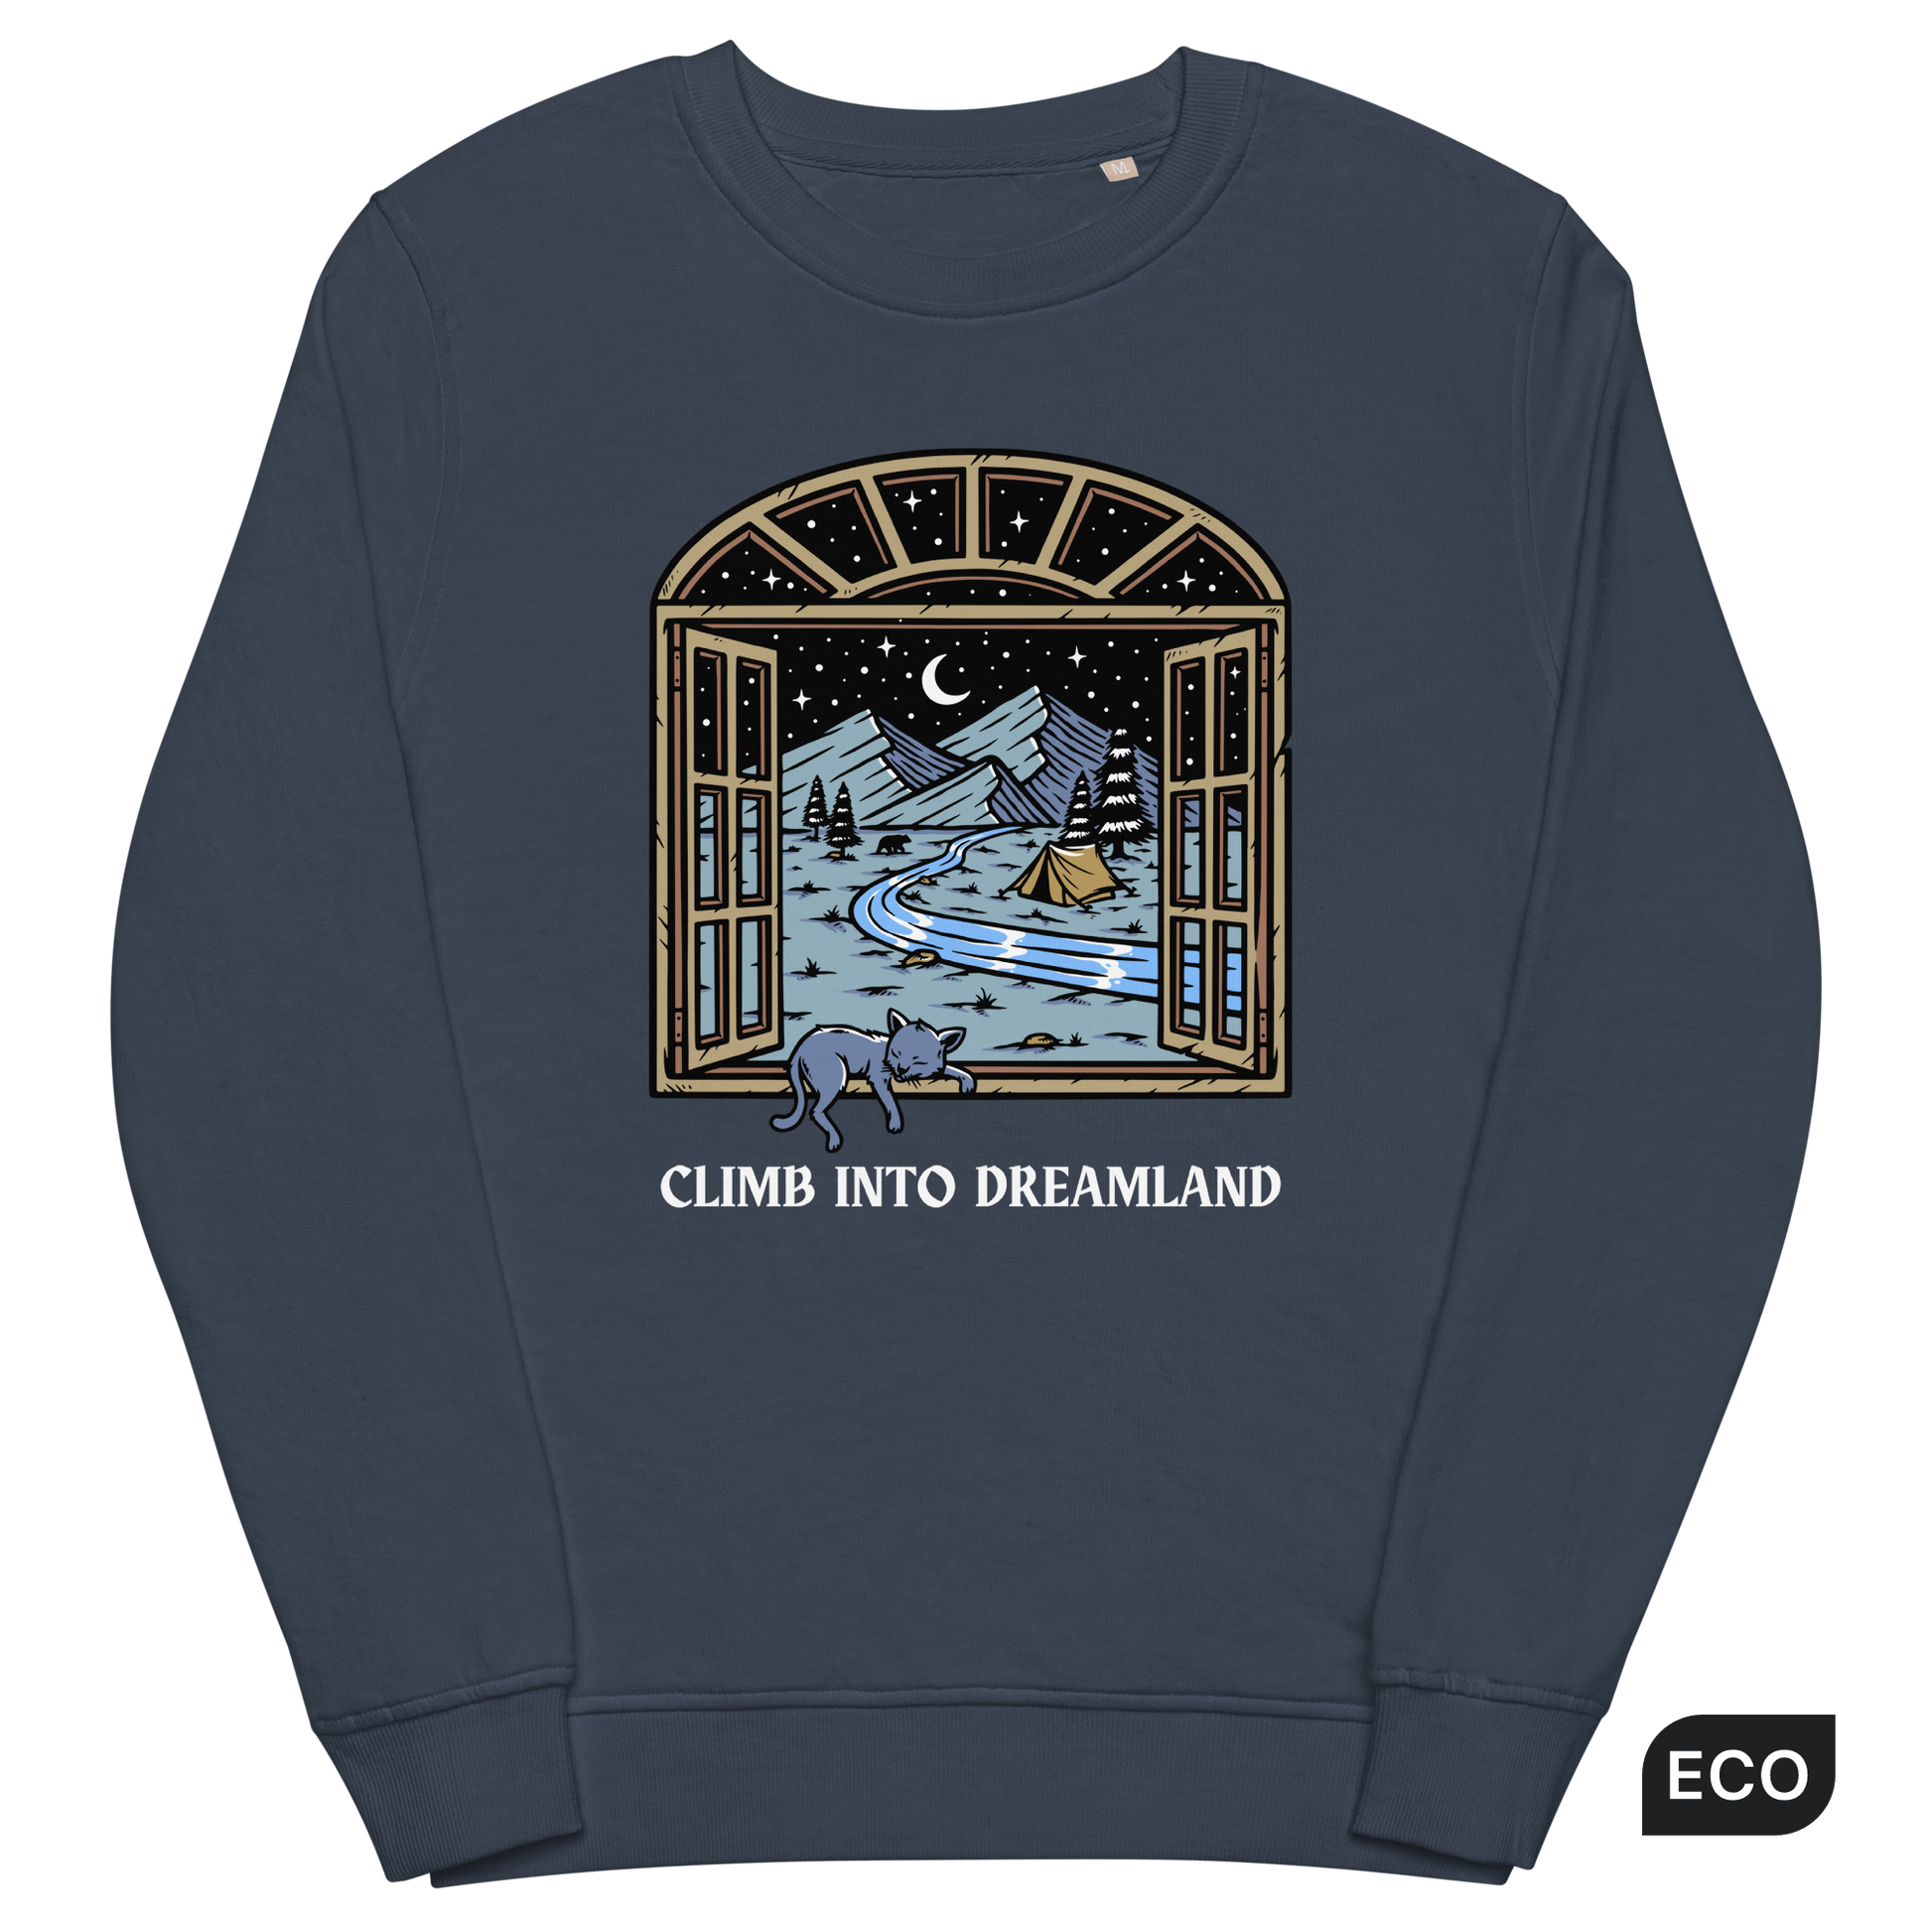 French Navy Organic Cotton Climb Into Dreamland Sweatshirt featuring a mesmerizing mountain view graphic on the chest - Cool Graphic Nature Sweatshirts - Boozy Fox